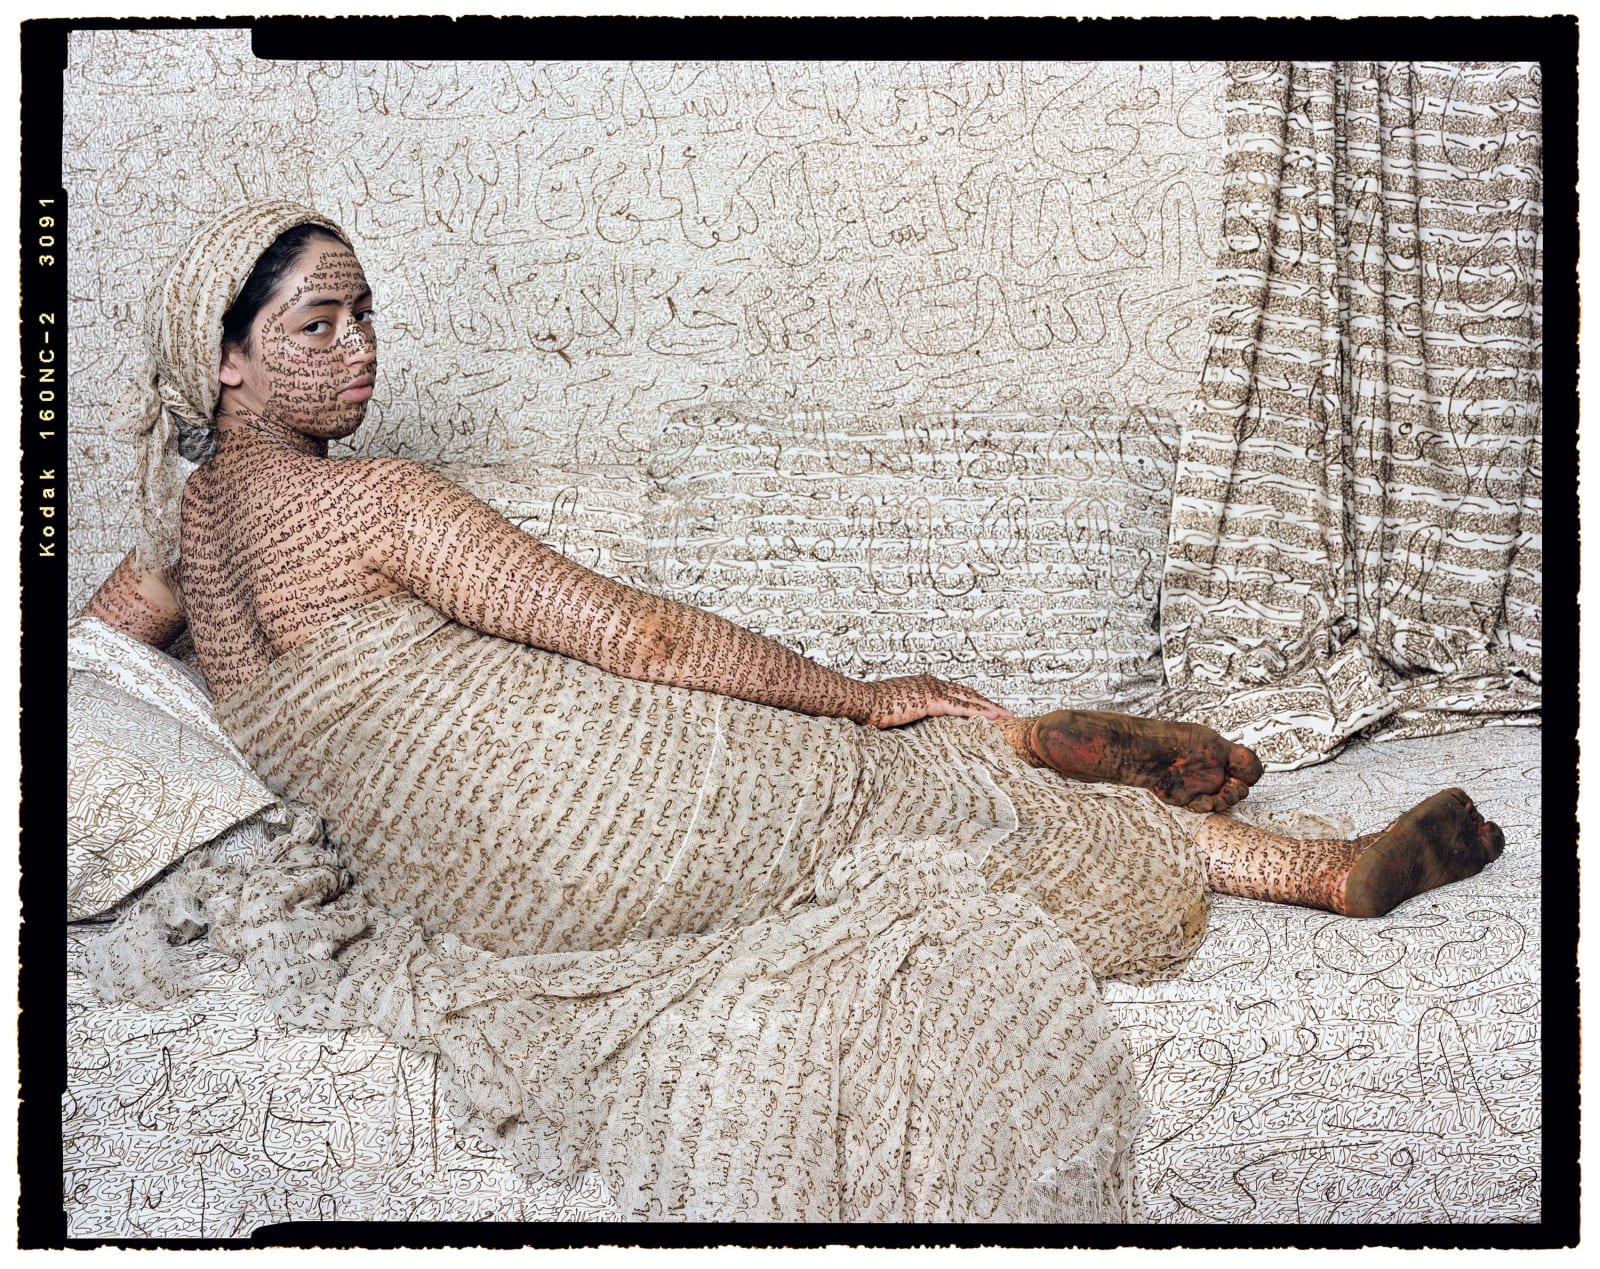 Lalla Essaydi Les Femmes du Maroc: La Grande Odalisque, woman posing to imitate subject in Jean Auguste Dominique Ingres' painting La Grande Odalisque, her skin and all fabric inscribed with Arabic calligraphy in henna